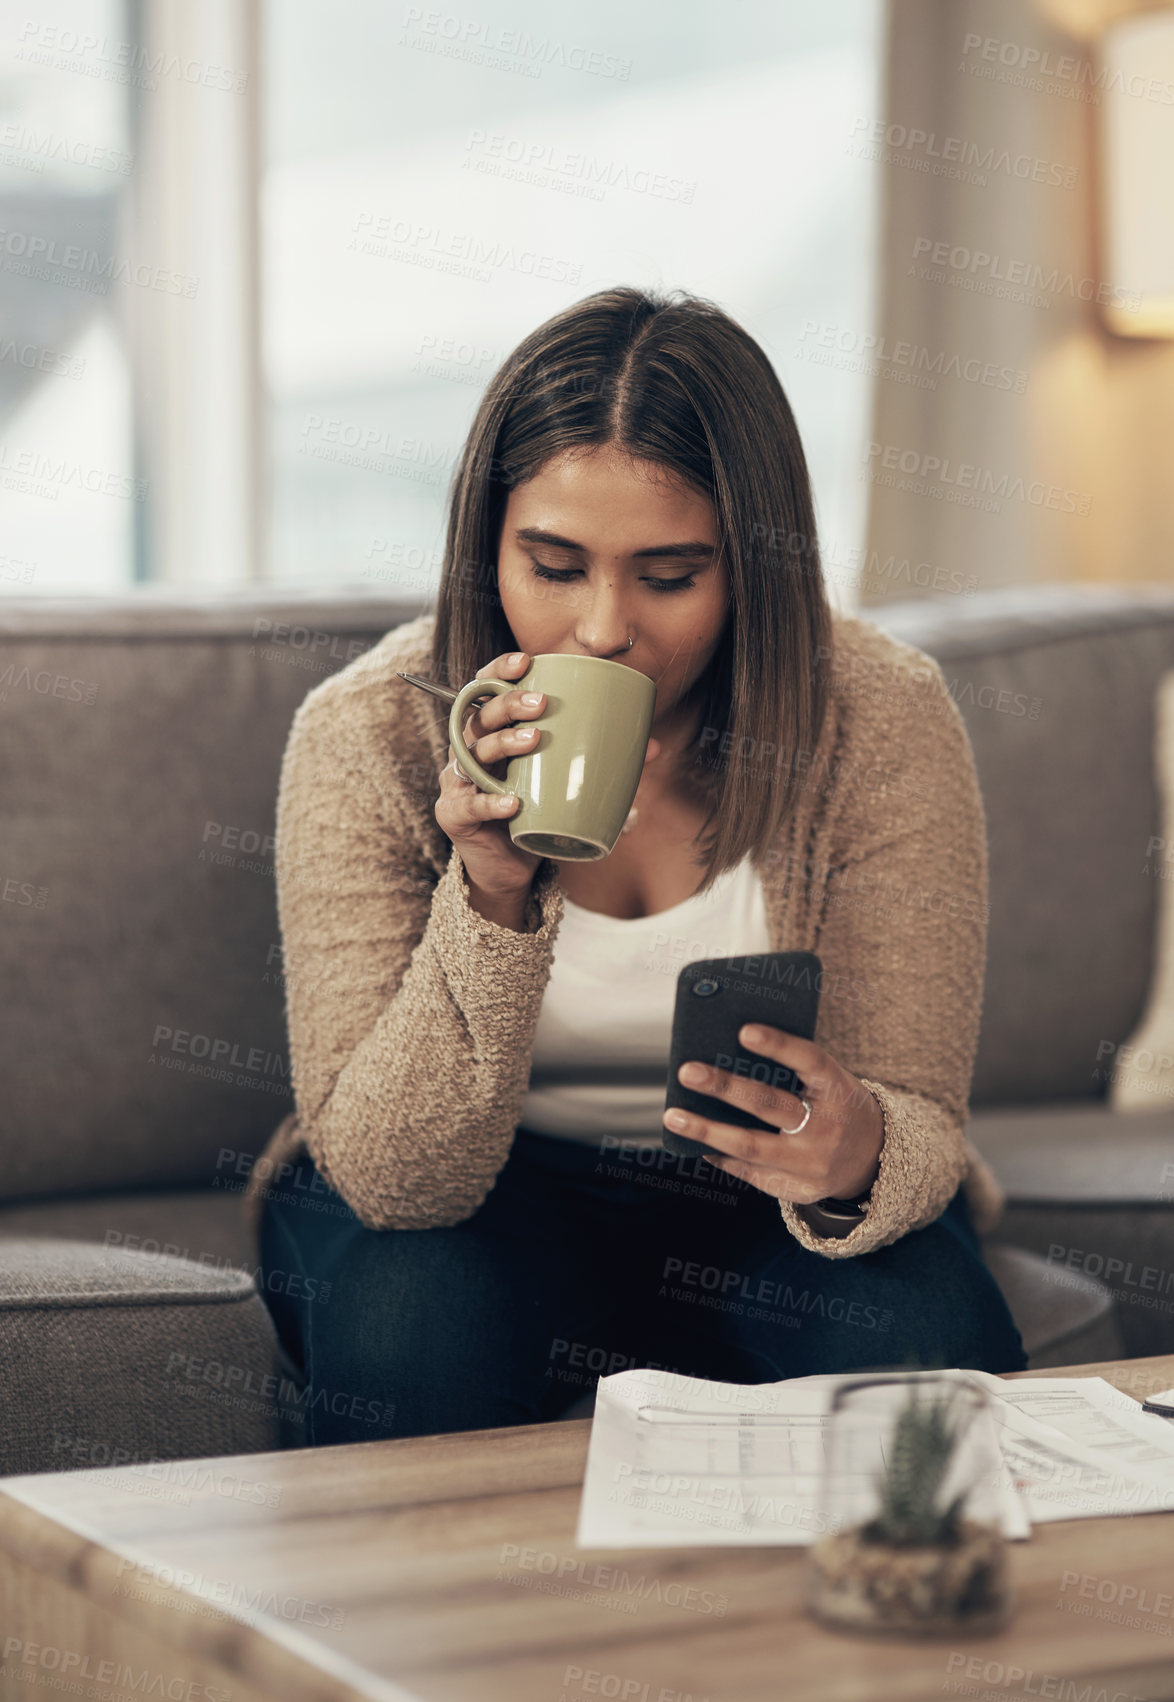 Buy stock photo Shot of a young woman having coffee and using a smartphone while going through paperwork at home